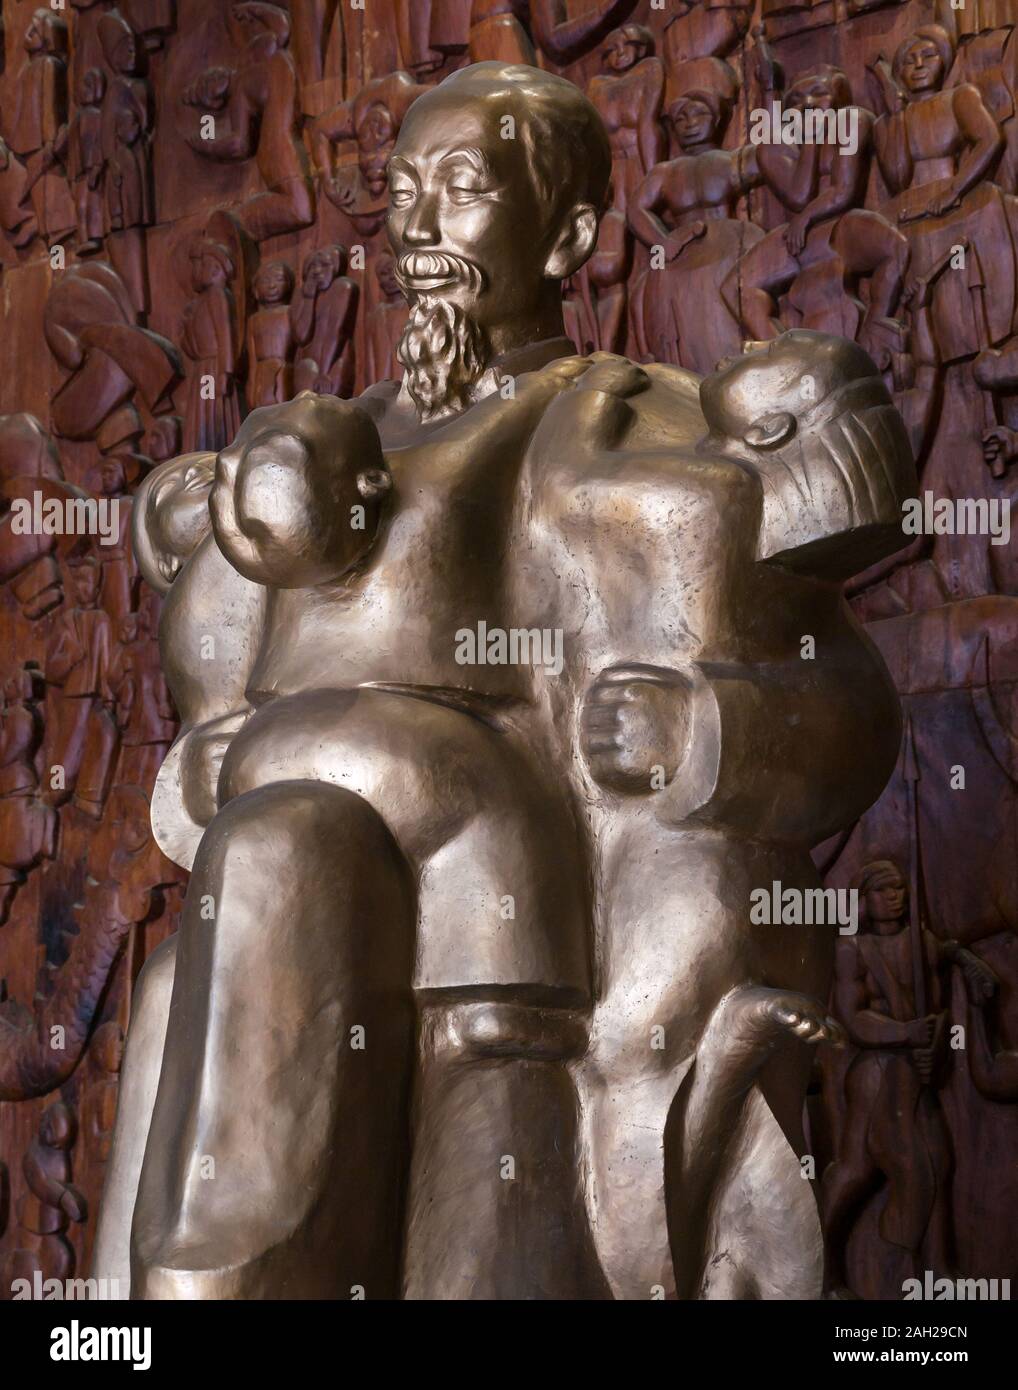 Ho Chi Minh or Uncle Ho sculpture with children, Thai Nguyen museum of ethnology, Northern Vietnam, Asia Stock Photo